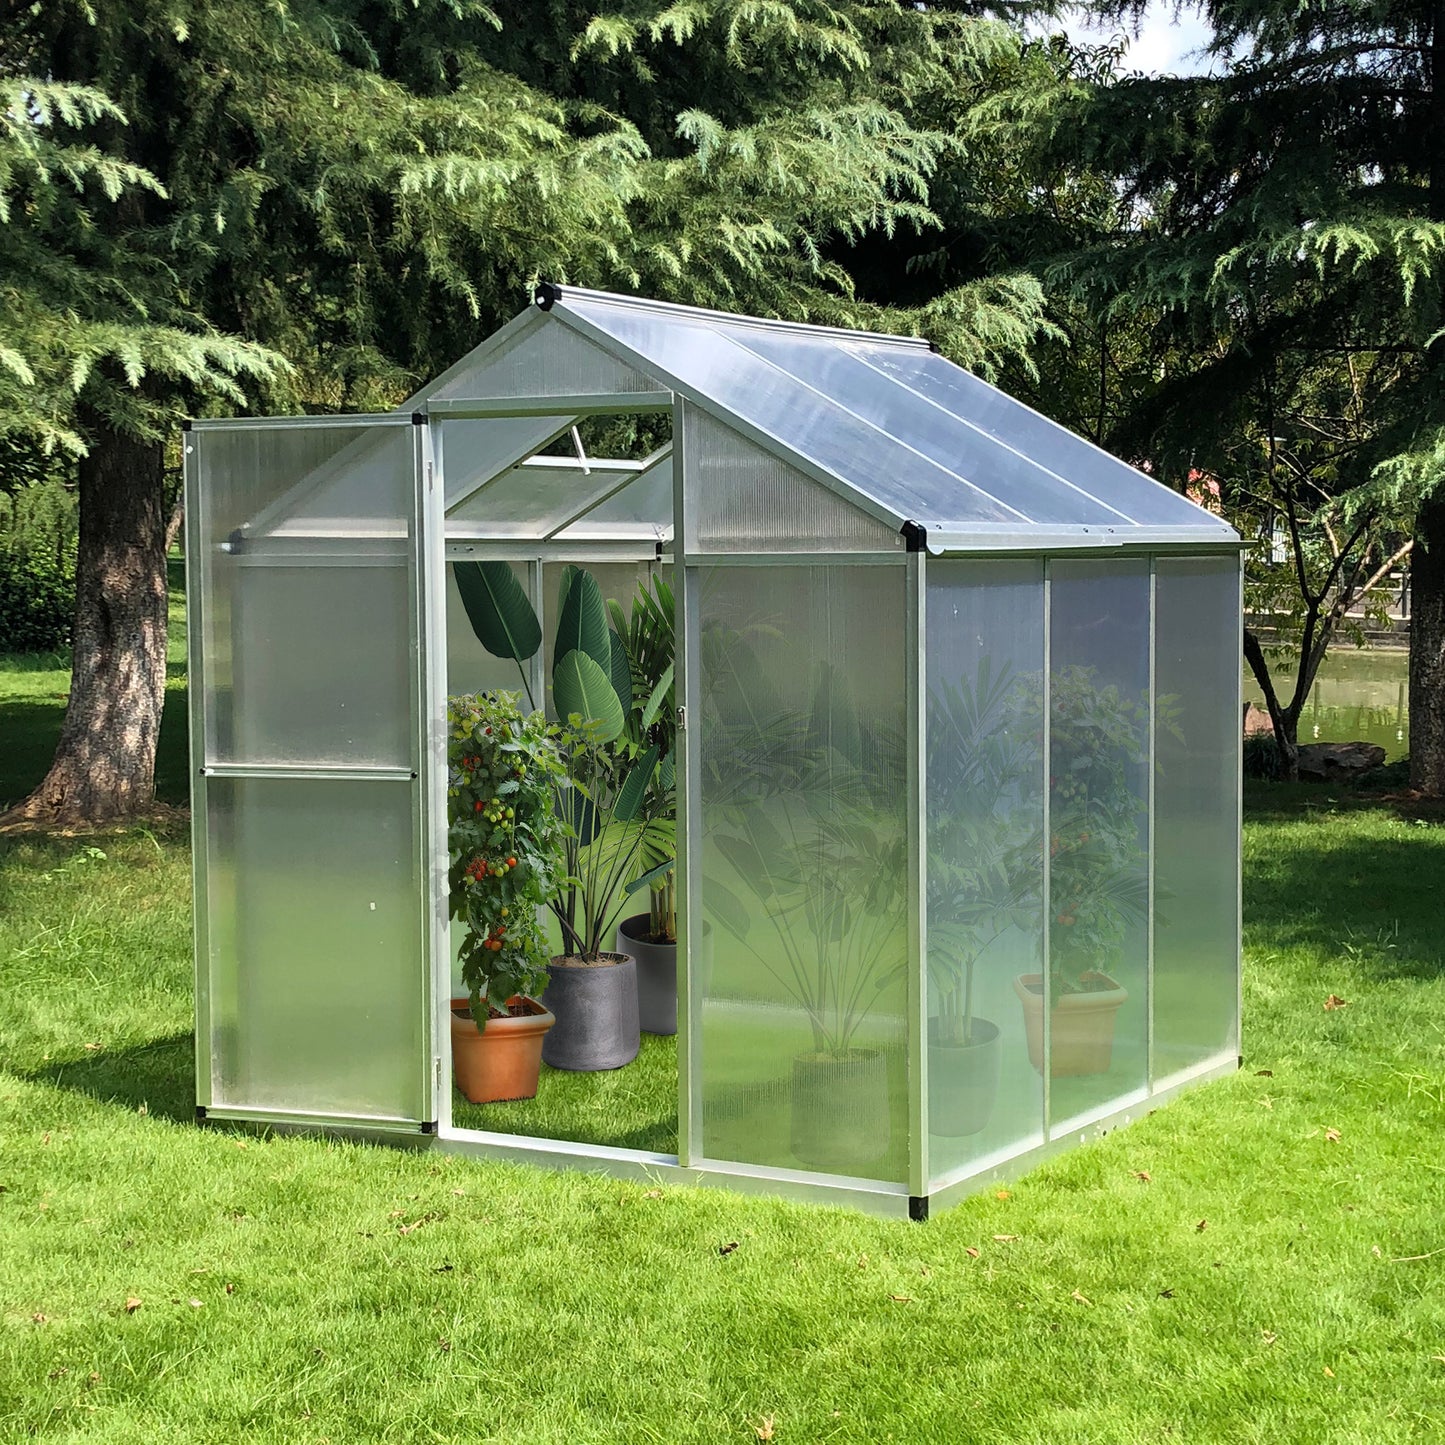 6' x 6' x 6.4' Walk-in Garden Greenhouse Polycarbonate Panels Plants Flower Growth Shed Cold Frame Outdoor Portable Warm House at Gallery Canada